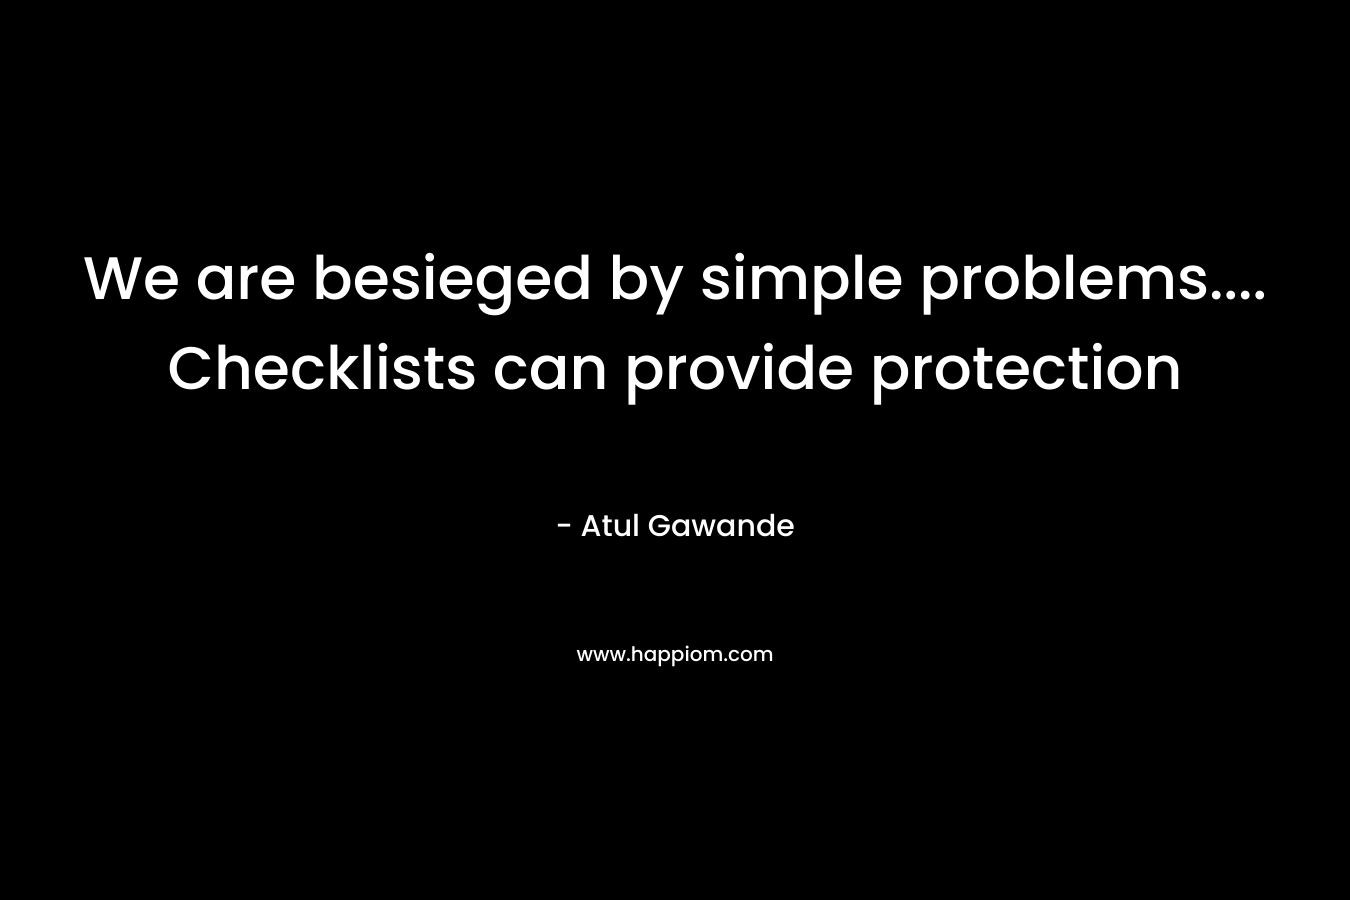 We are besieged by simple problems.... Checklists can provide protection